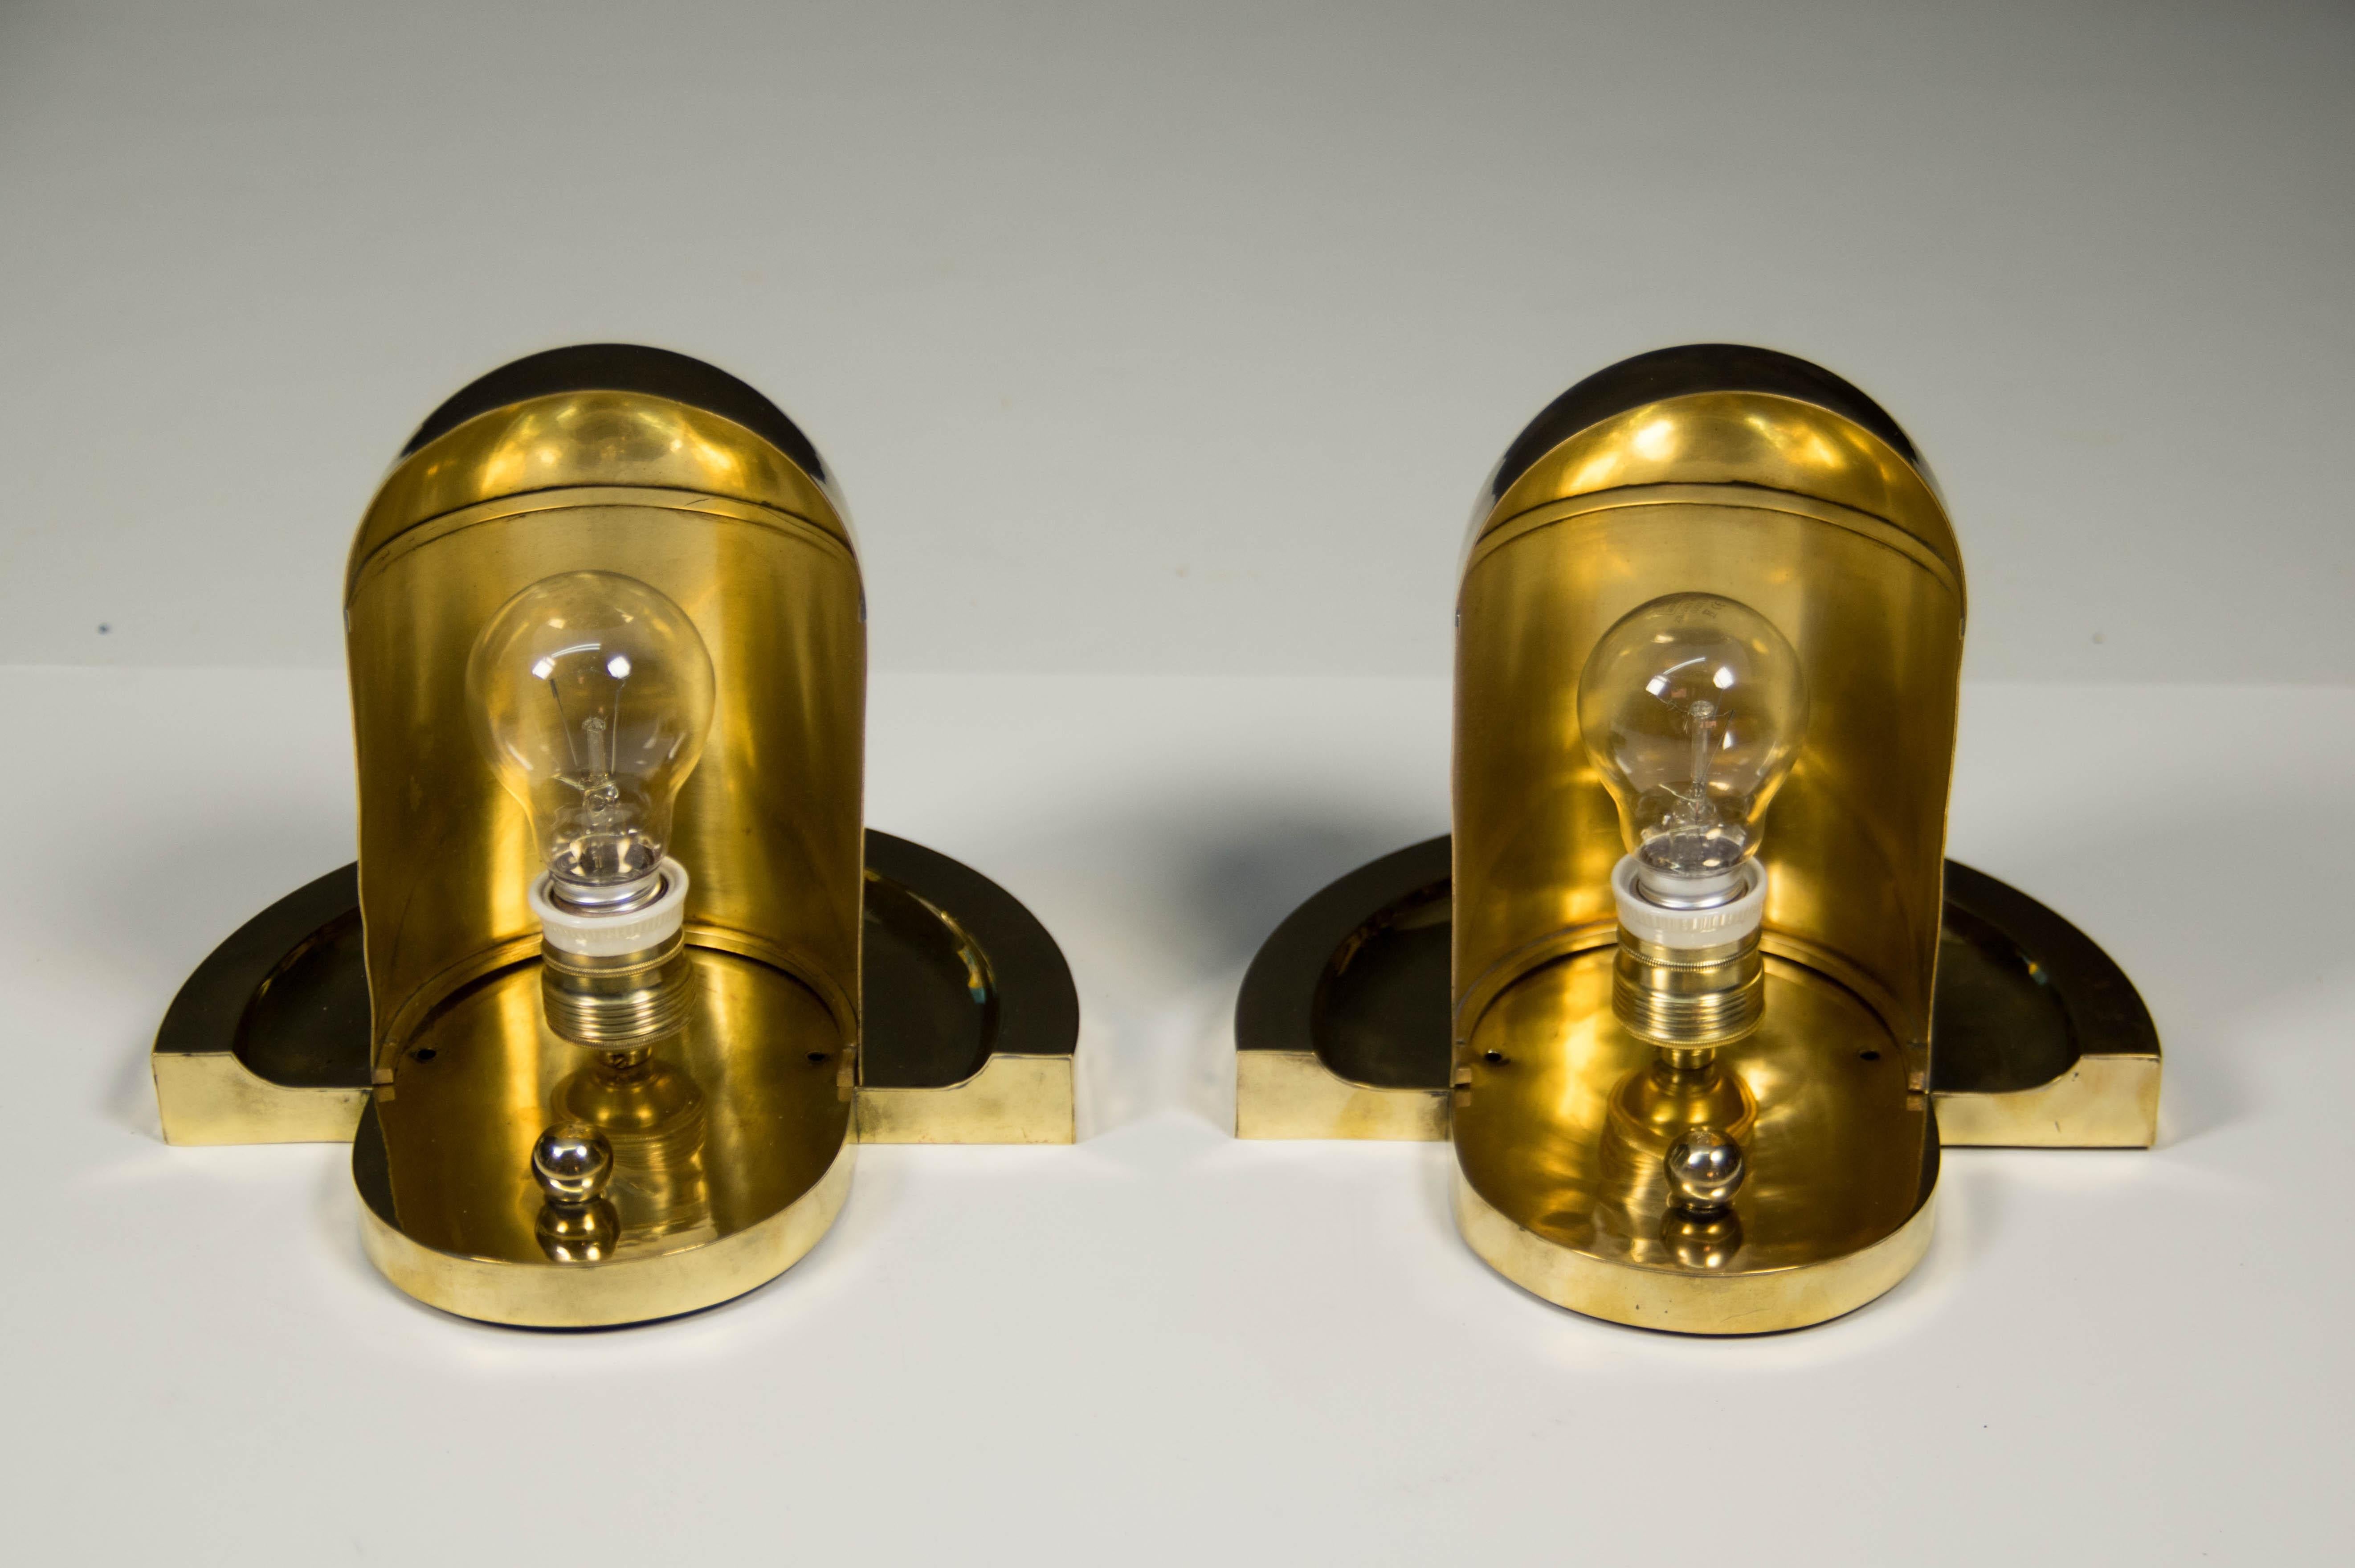 Set of Unique Cubistic Brass Wall Lamps, 1920s For Sale 4